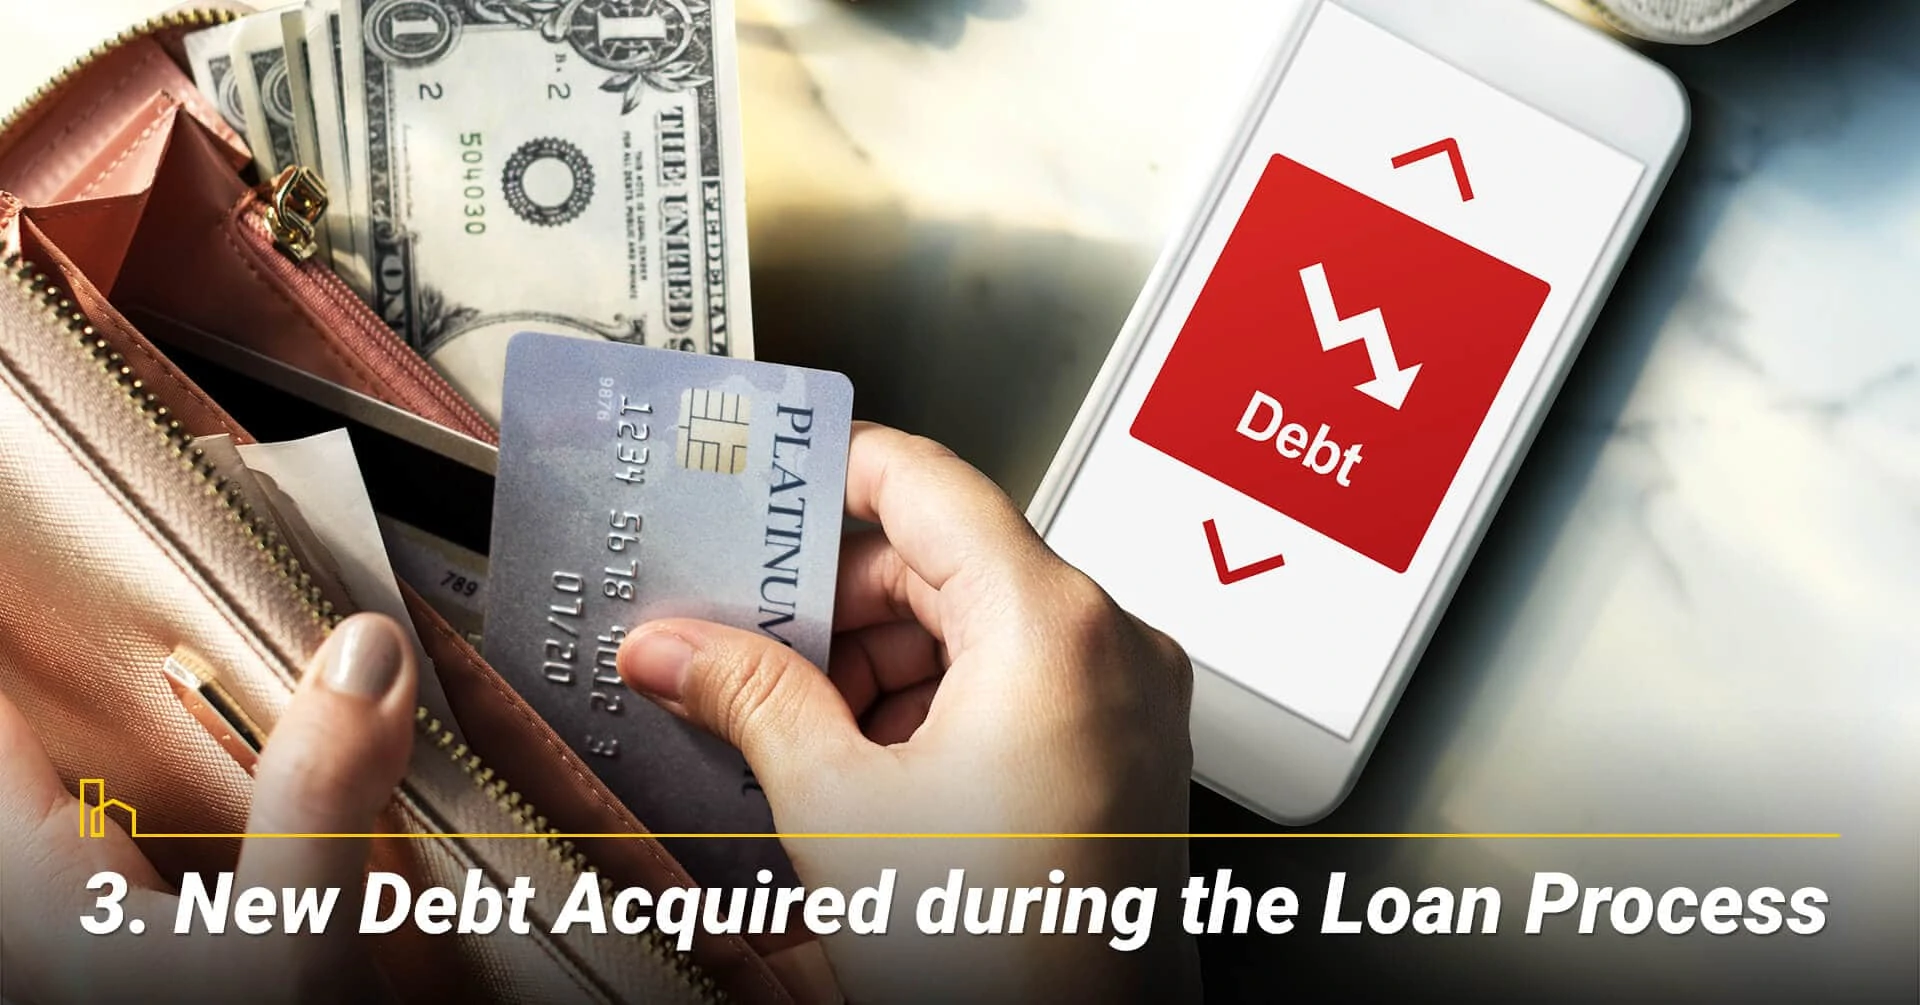 New Debt Acquired during the Loan Process, getting additional debt during the loan process